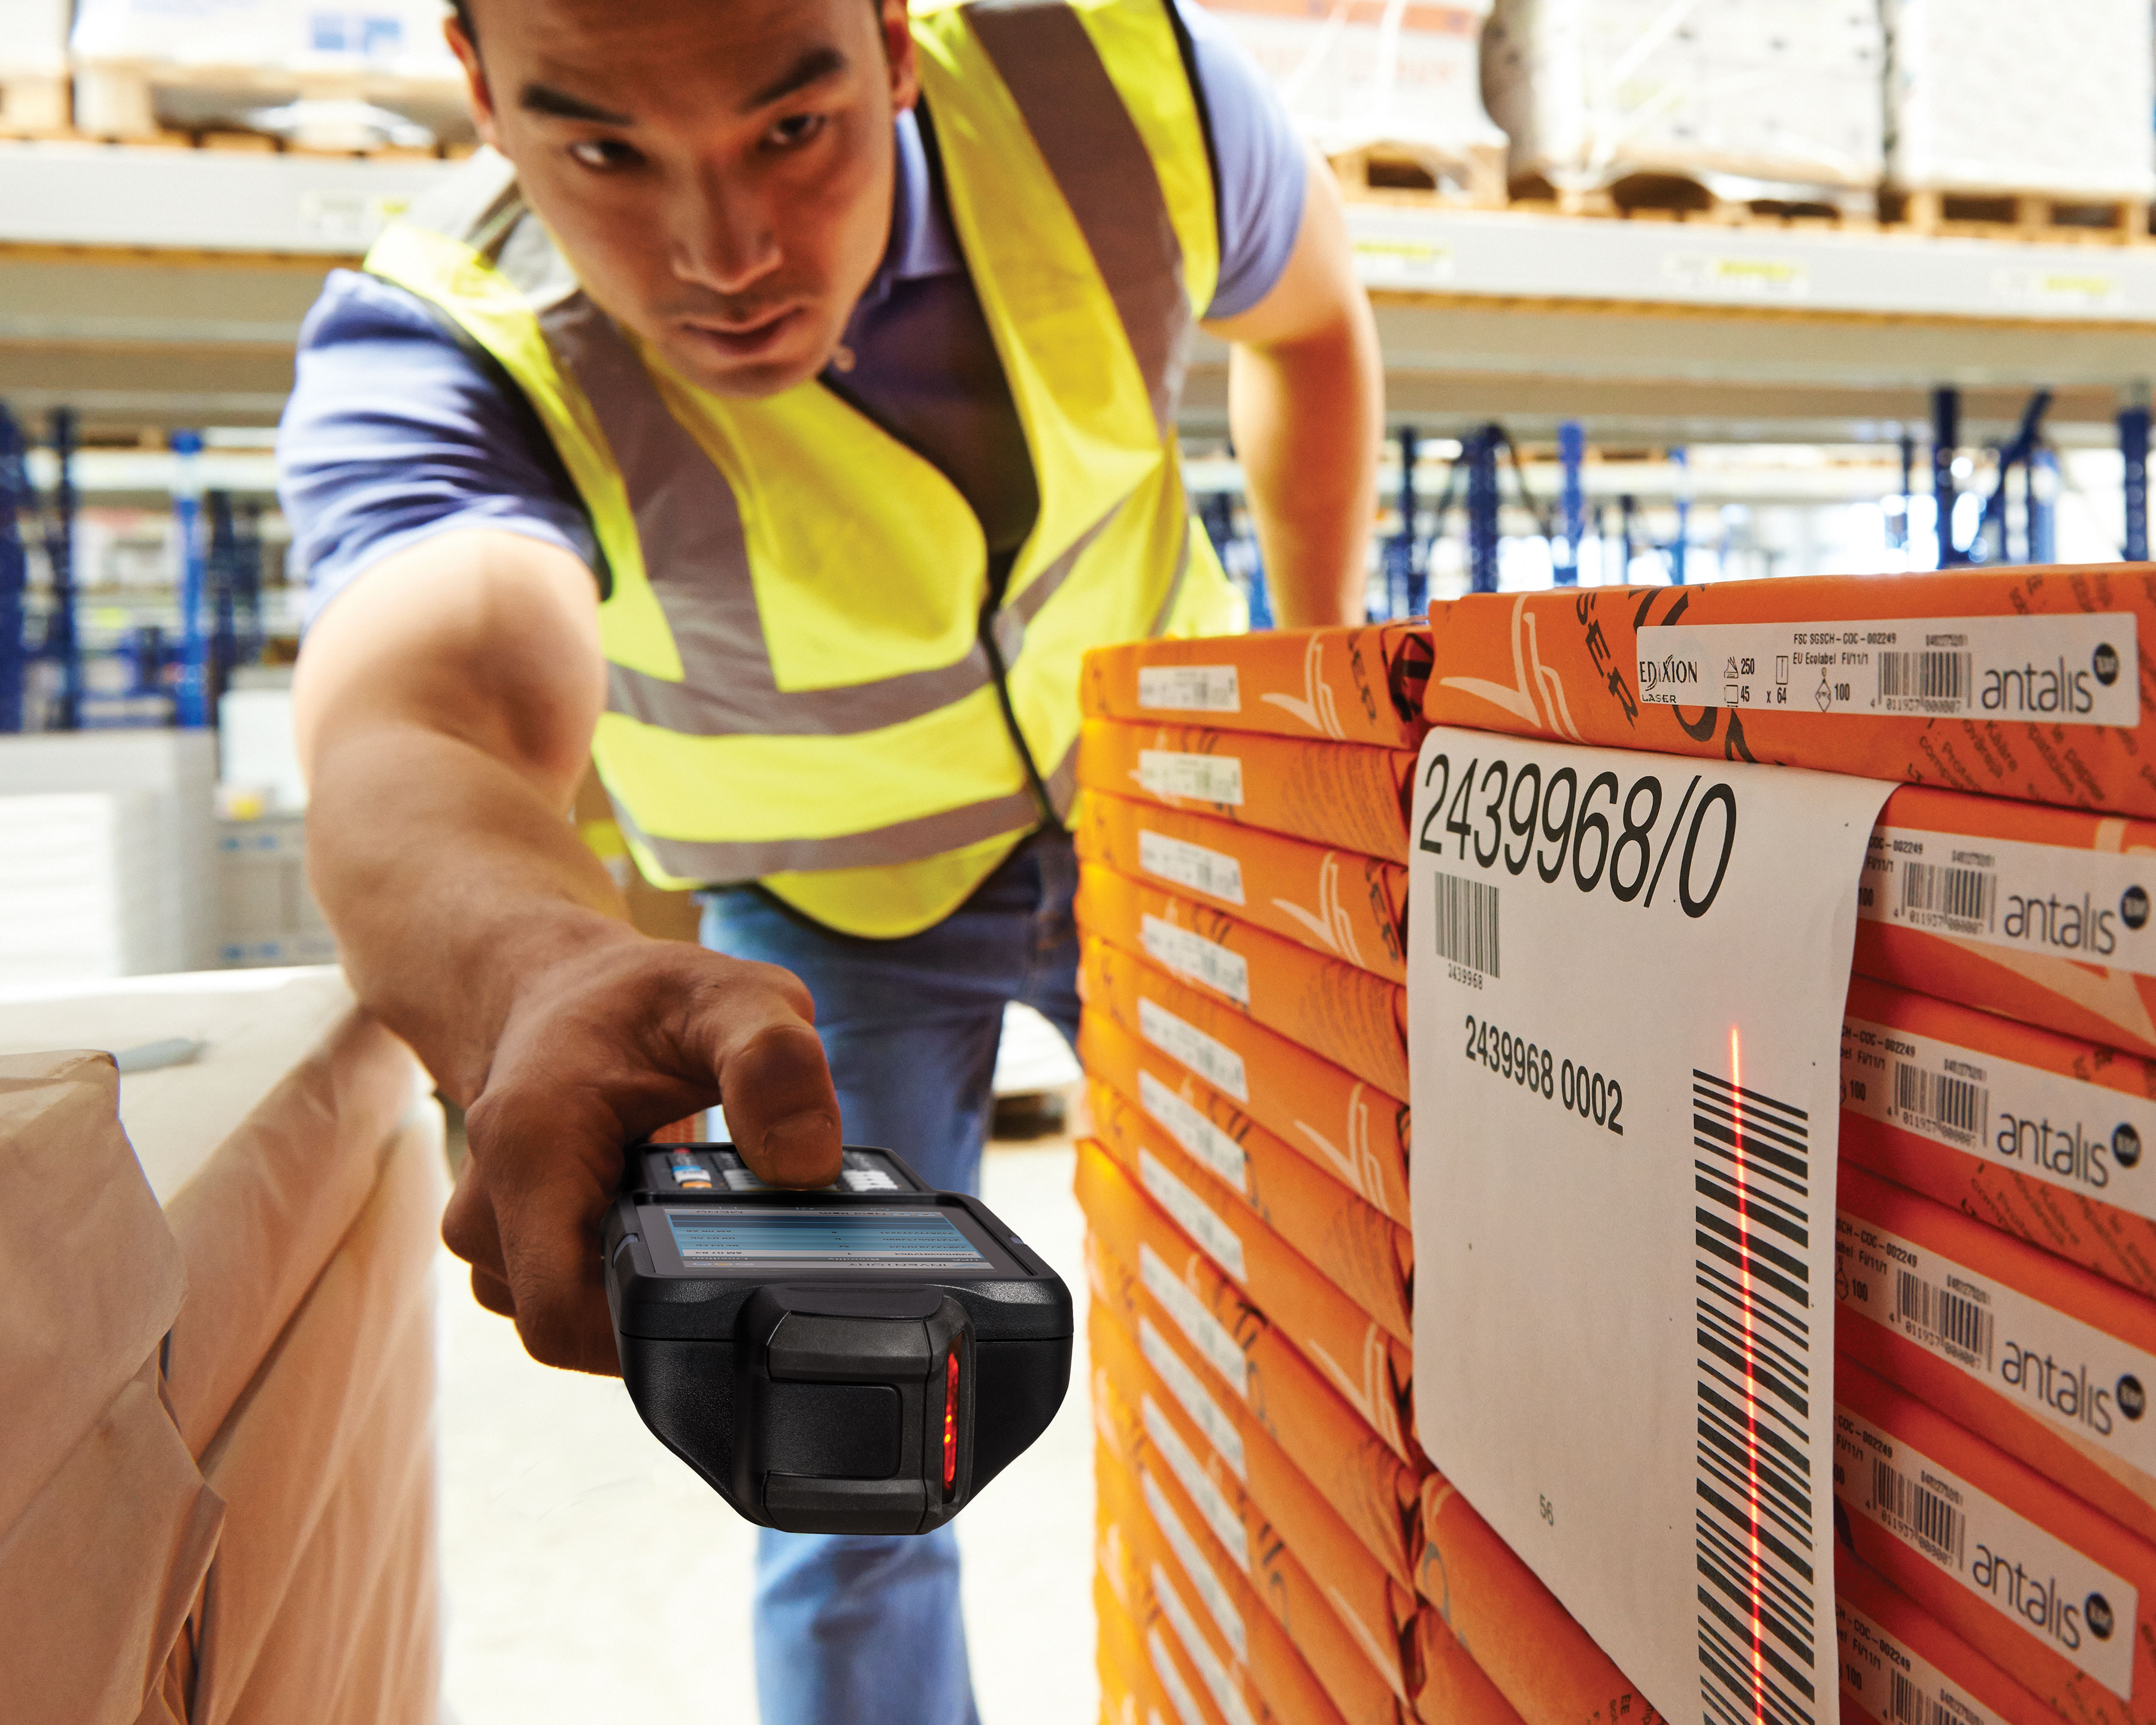 Warehouse worker uses Zebra MC3300 mobile computer with a rotating turret to scan a barcode label in a tight space between two stacks of inventory